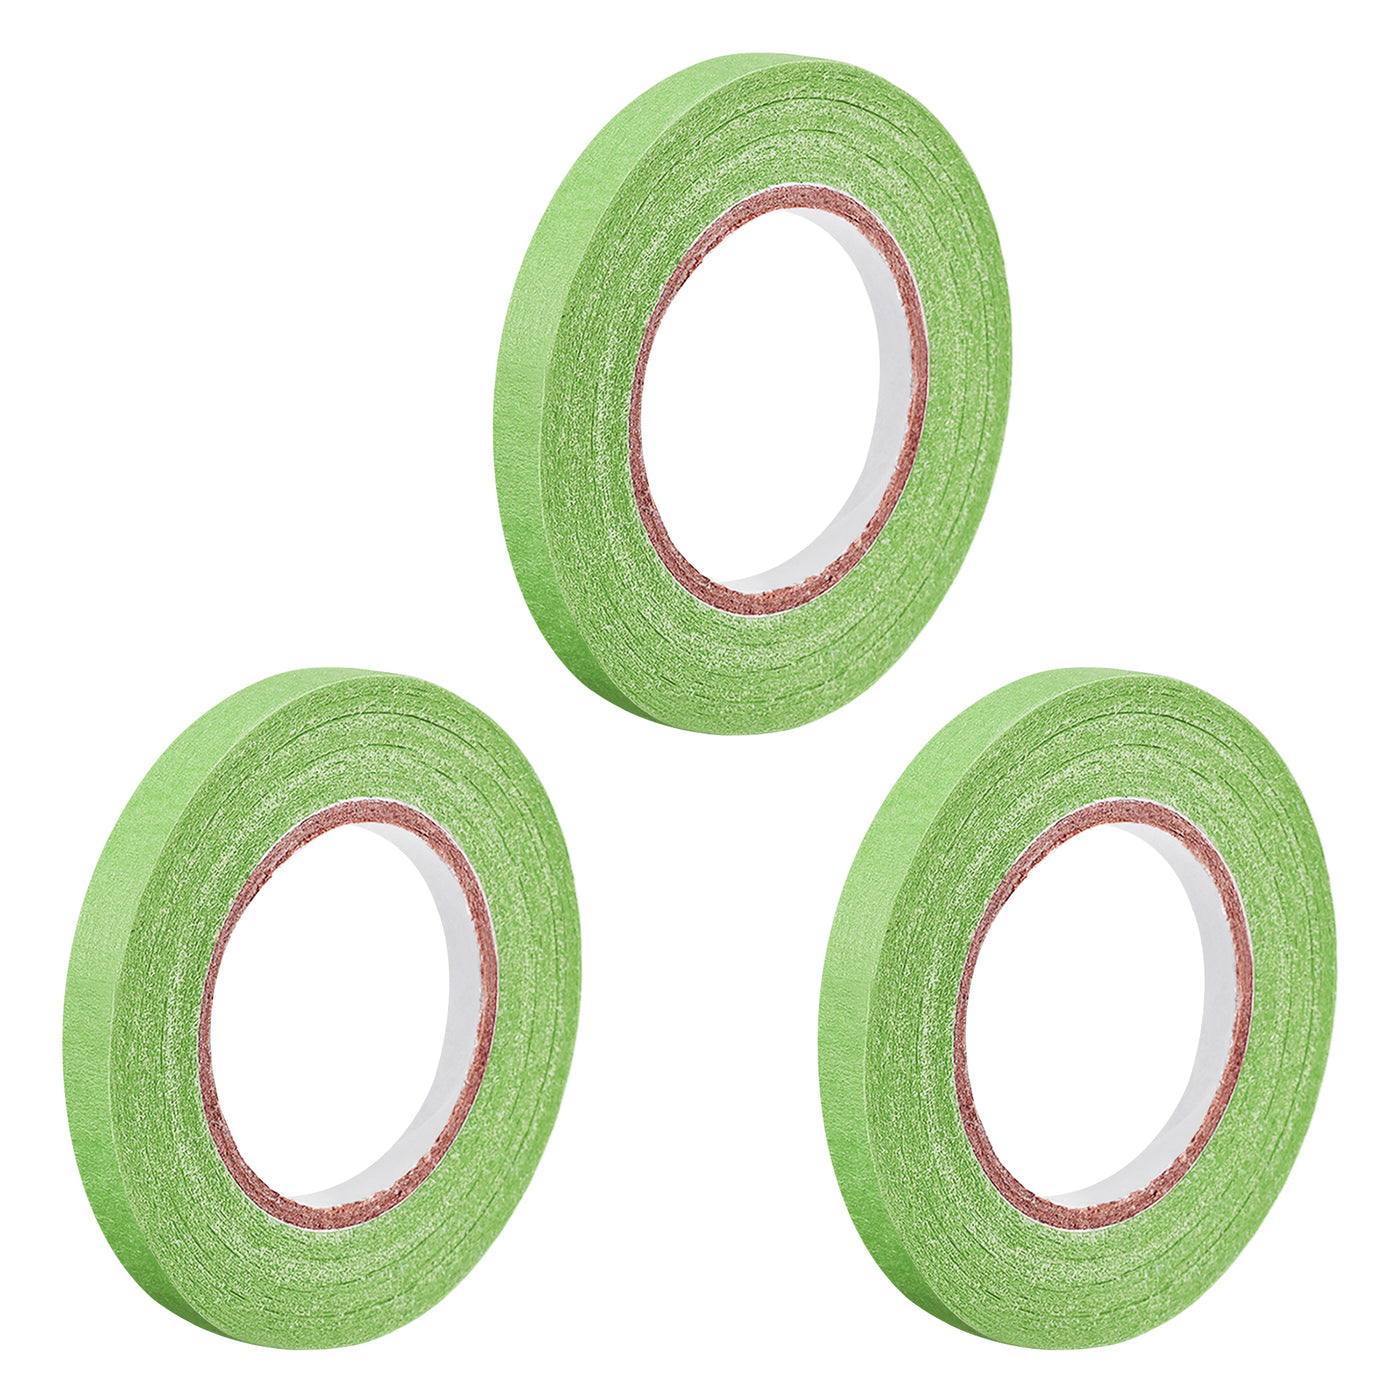 Uxcell Uxcell 3Pcs 40mm 1.6 inch Wide 20m 21 Yards Masking Tape Painter Tape Rolls Light Green